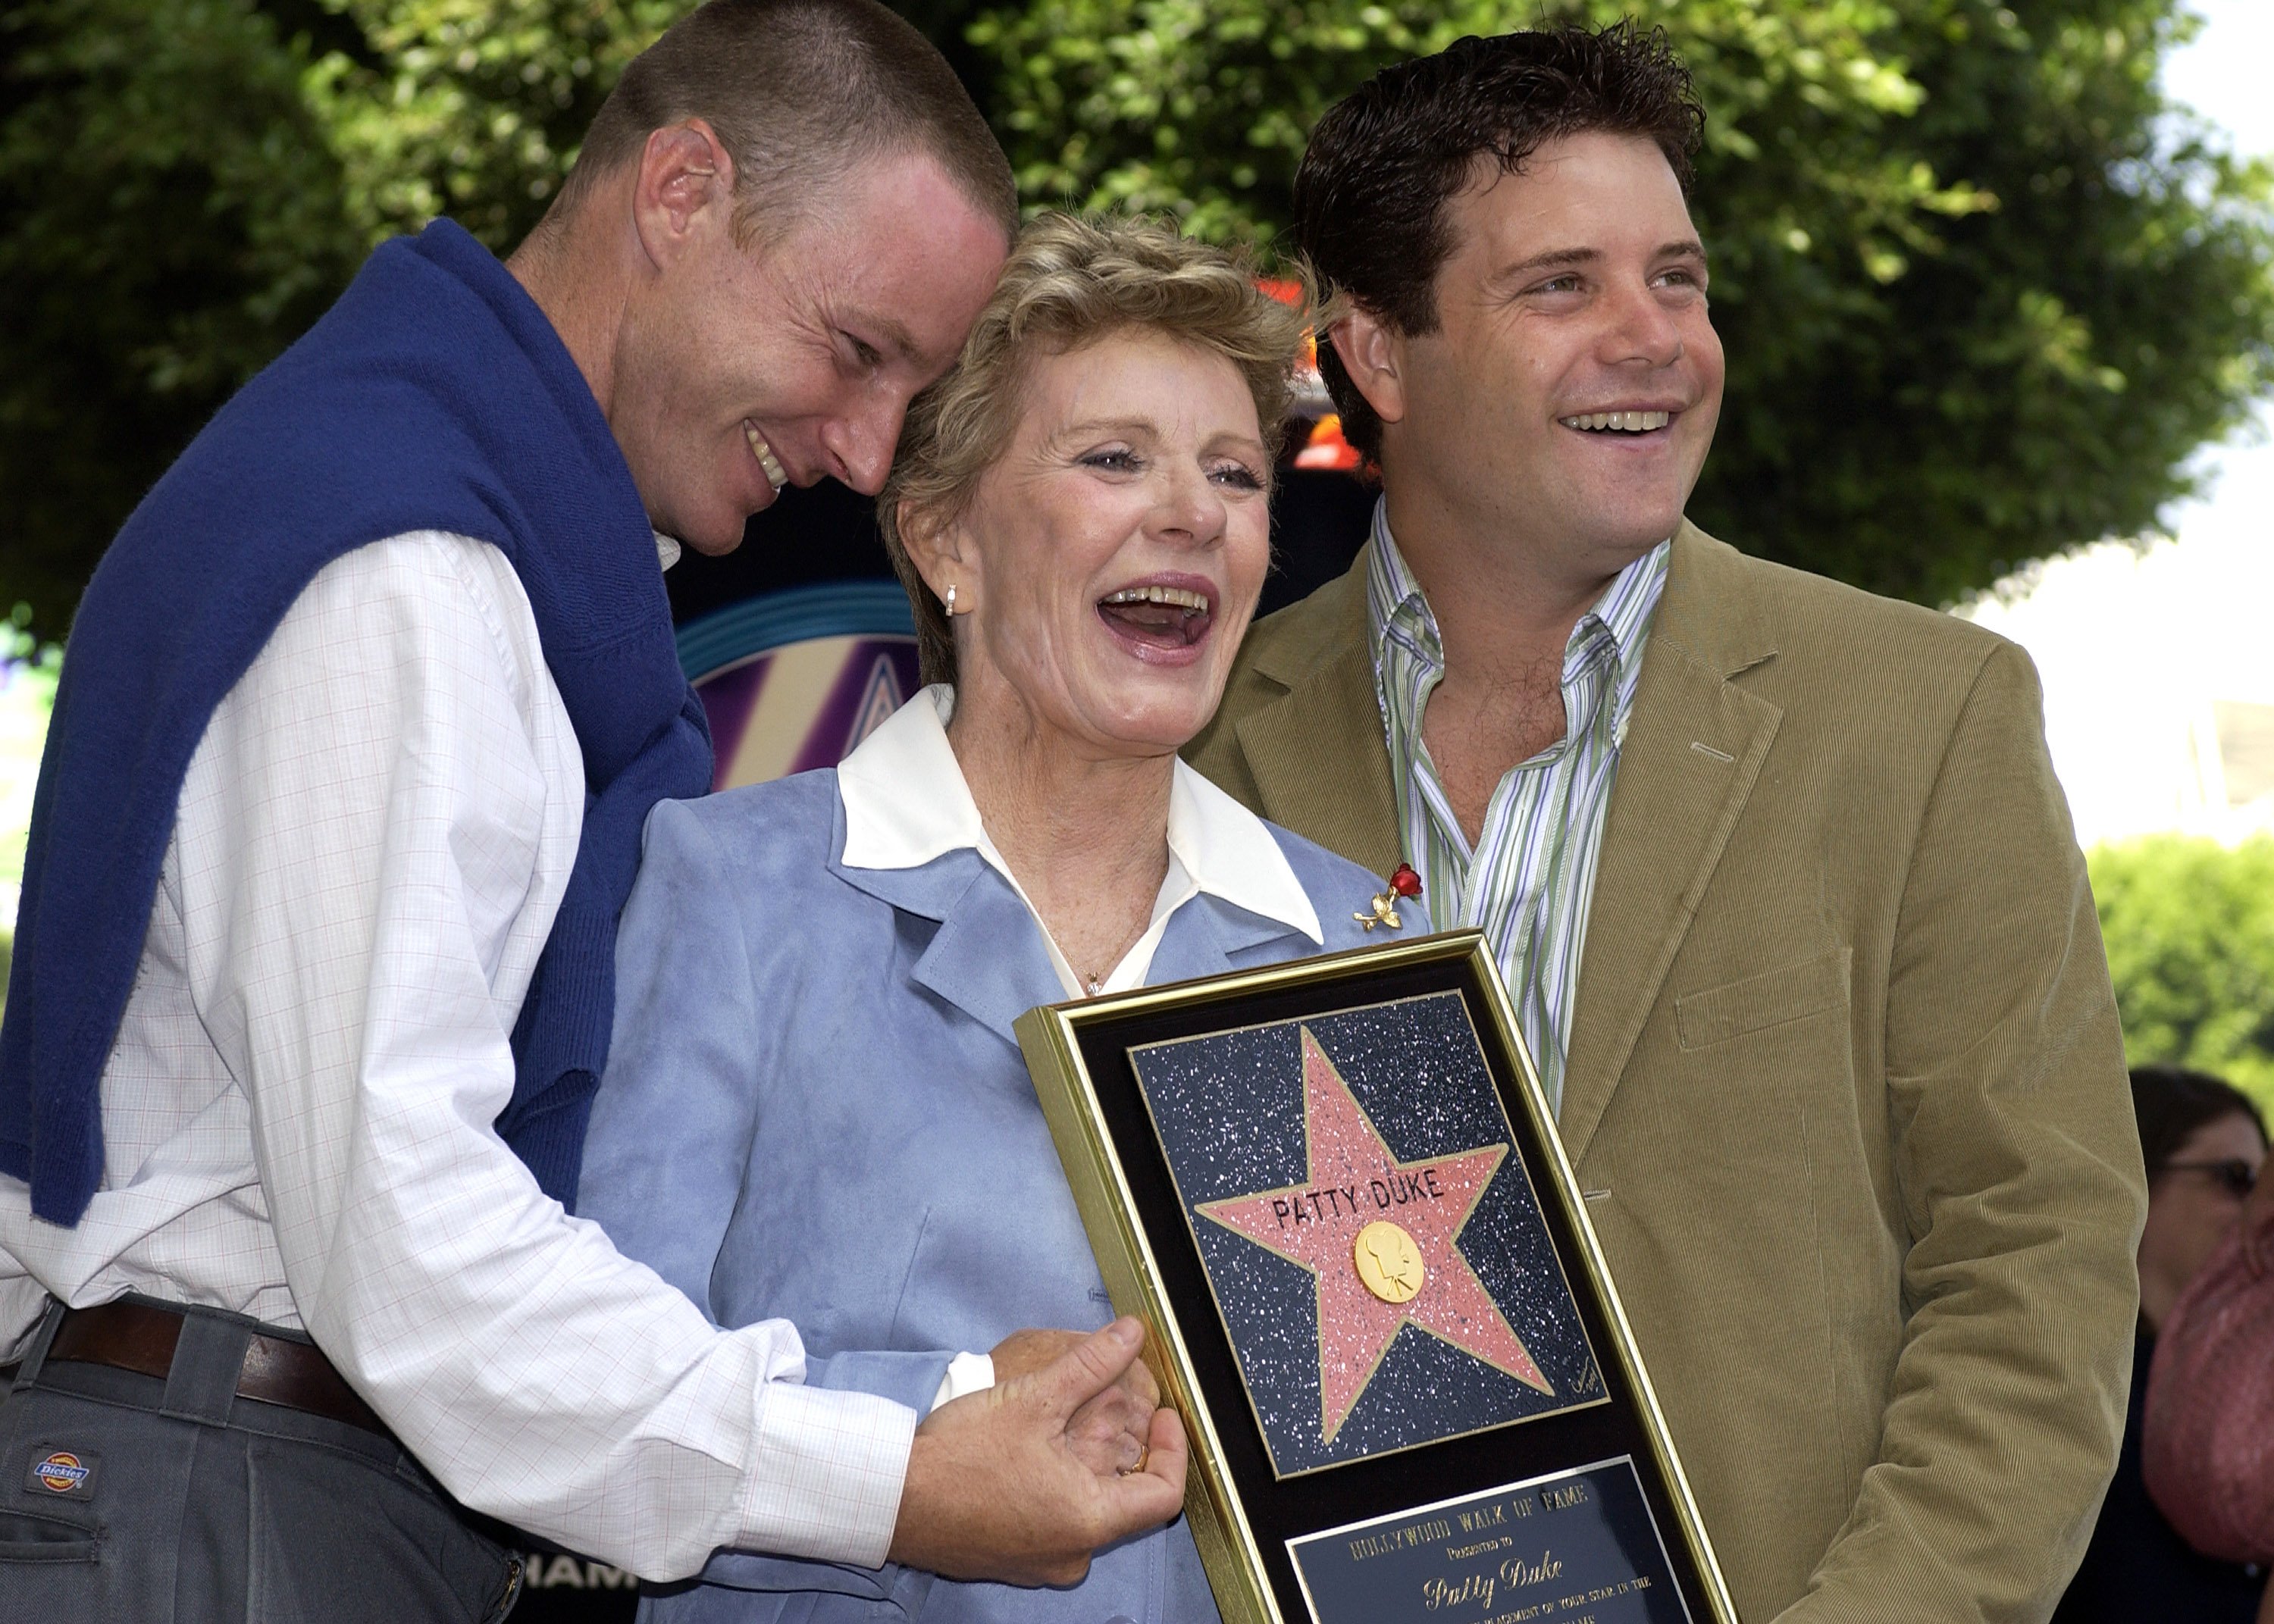 Patty Duke and sons MacKenzie (L) and Sean Astin attend the ceremony honoring her with a star on the Hollywood Walk of Fame August 17, 2004 in Hollywood, California. | Source: Getty Images